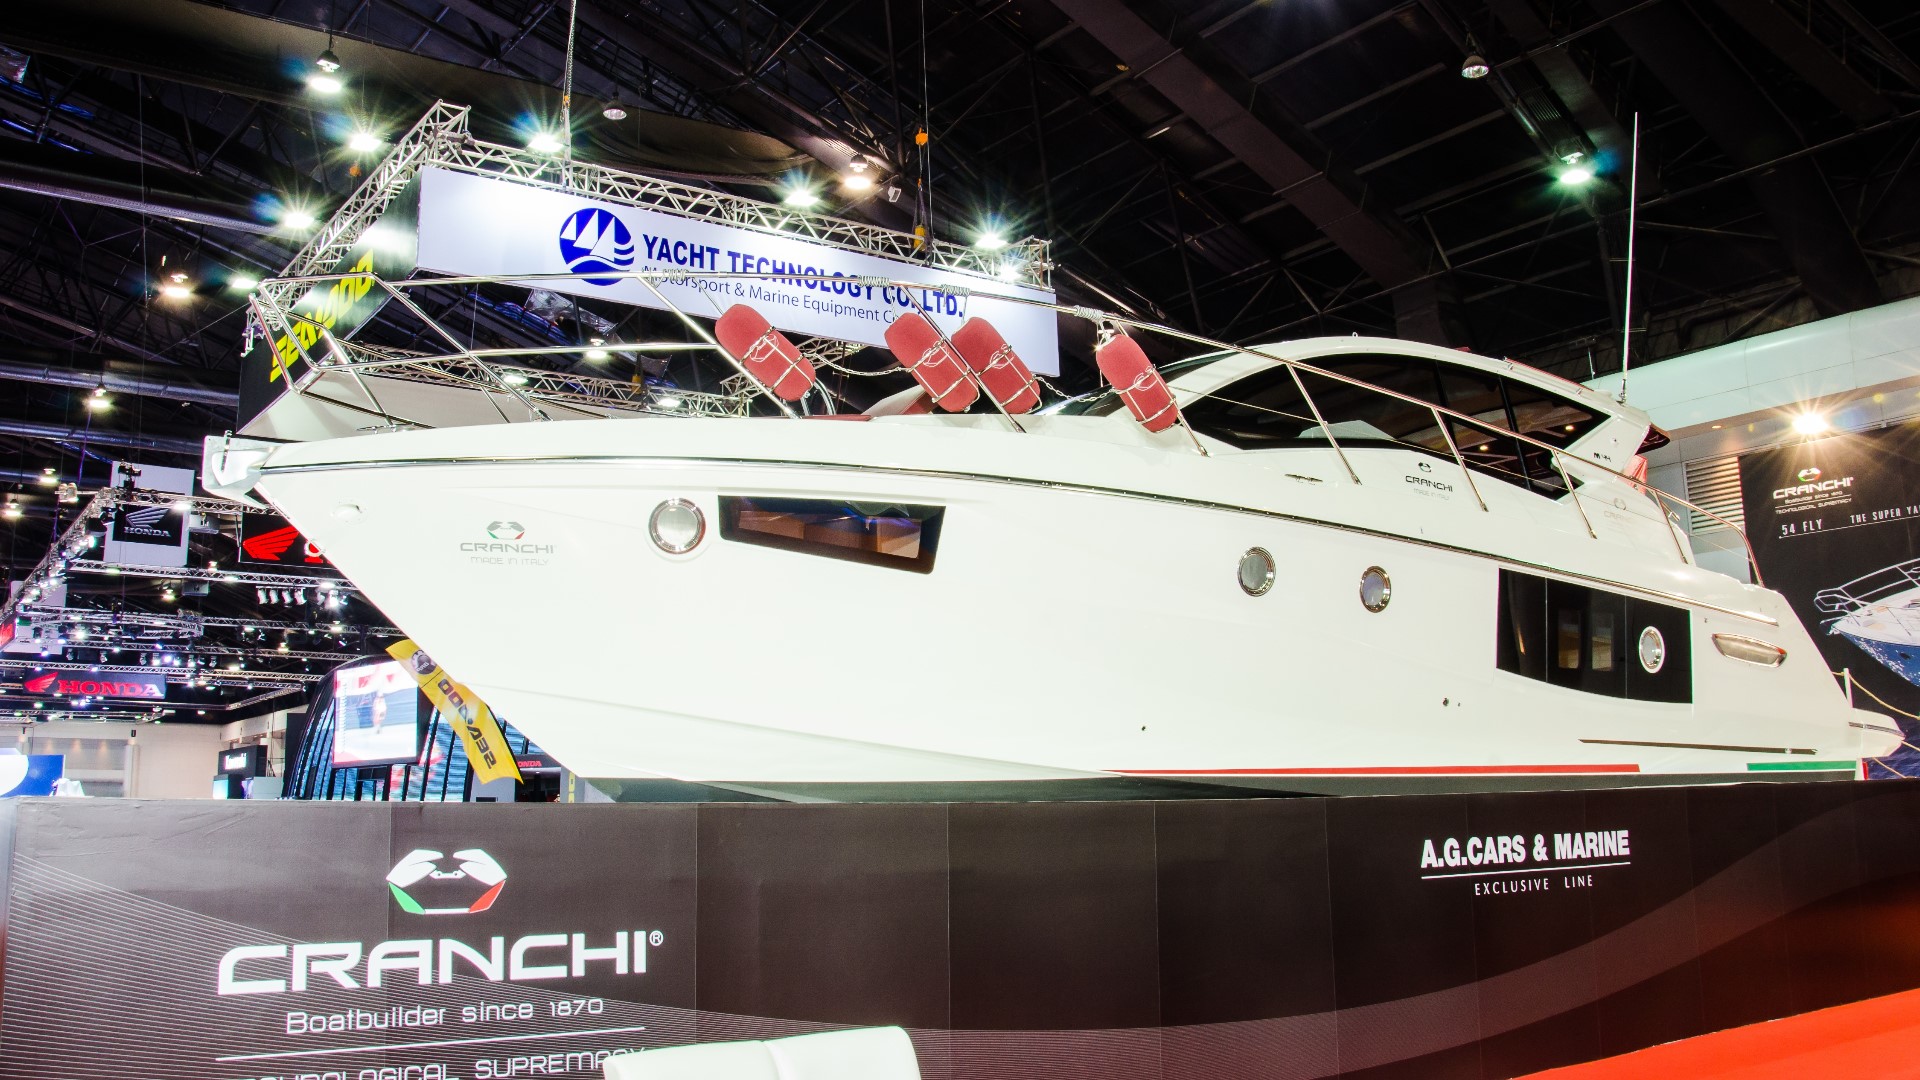 Sponsored by: The Chantilly Family Boat Show. The Chantilly Family Boat Show takes place at the Dulles Expo Center from March 10th to March 12th, 2023.